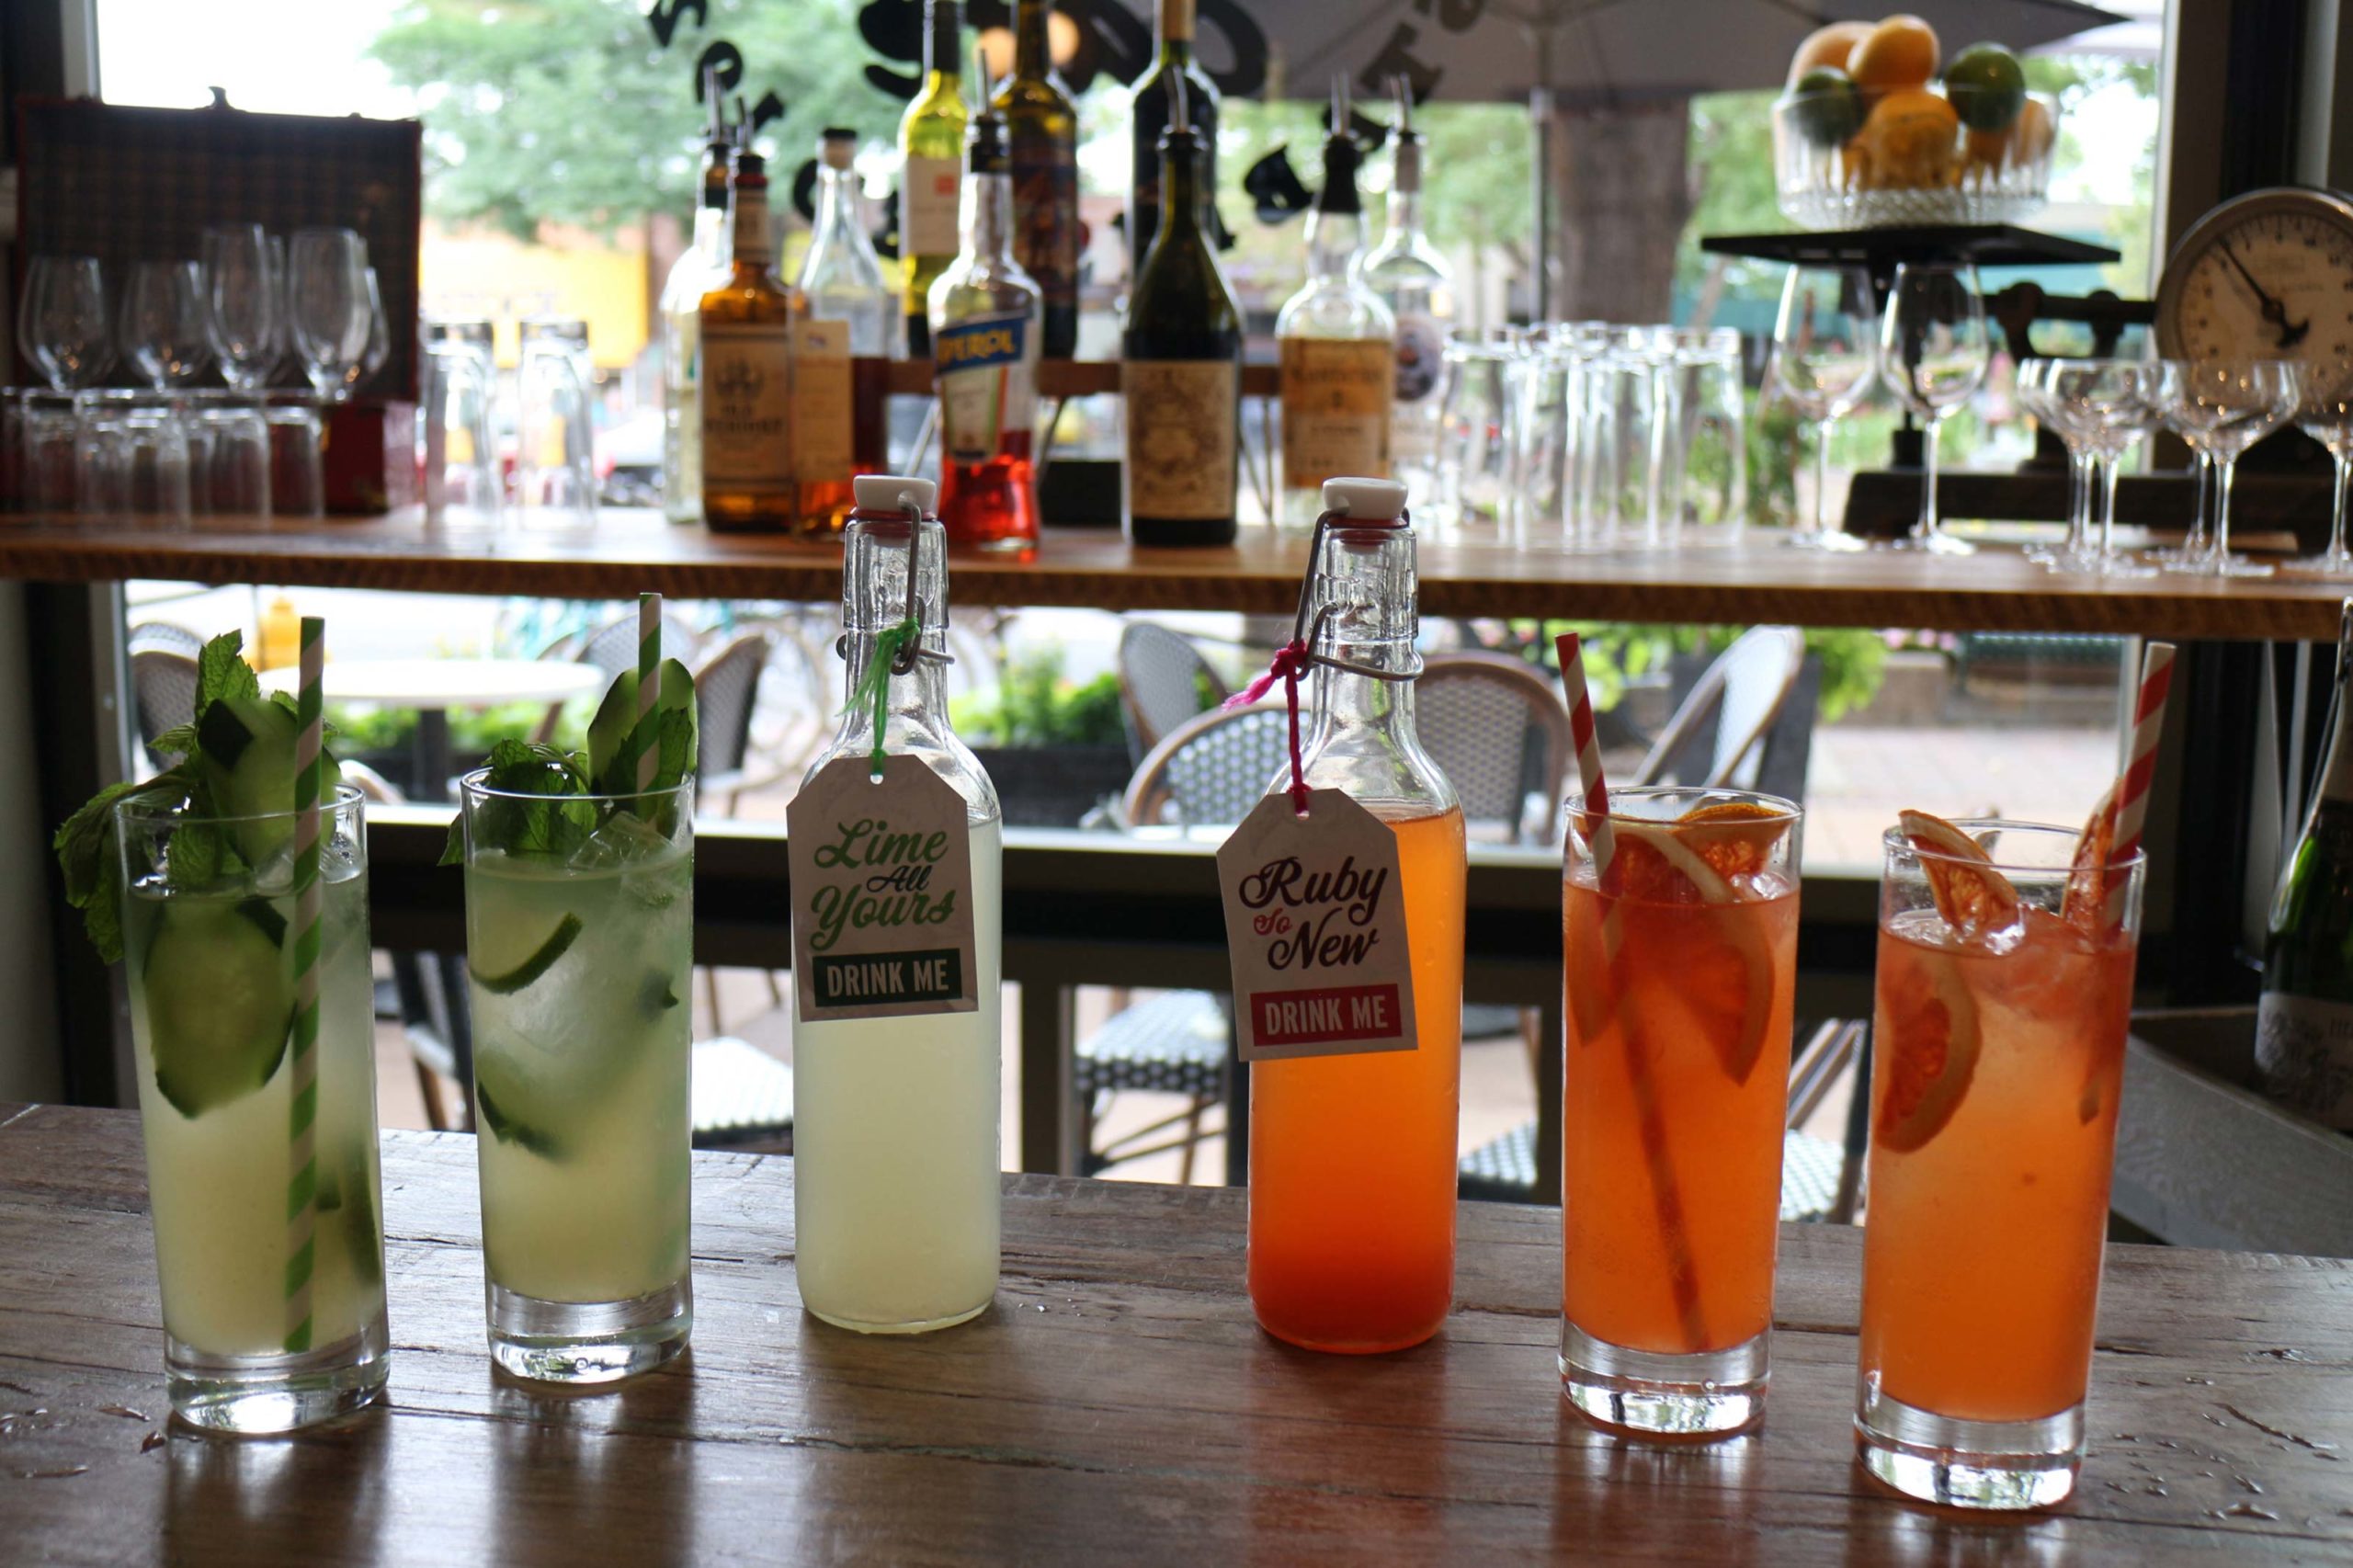 Bottled cocktails from the Ace Café